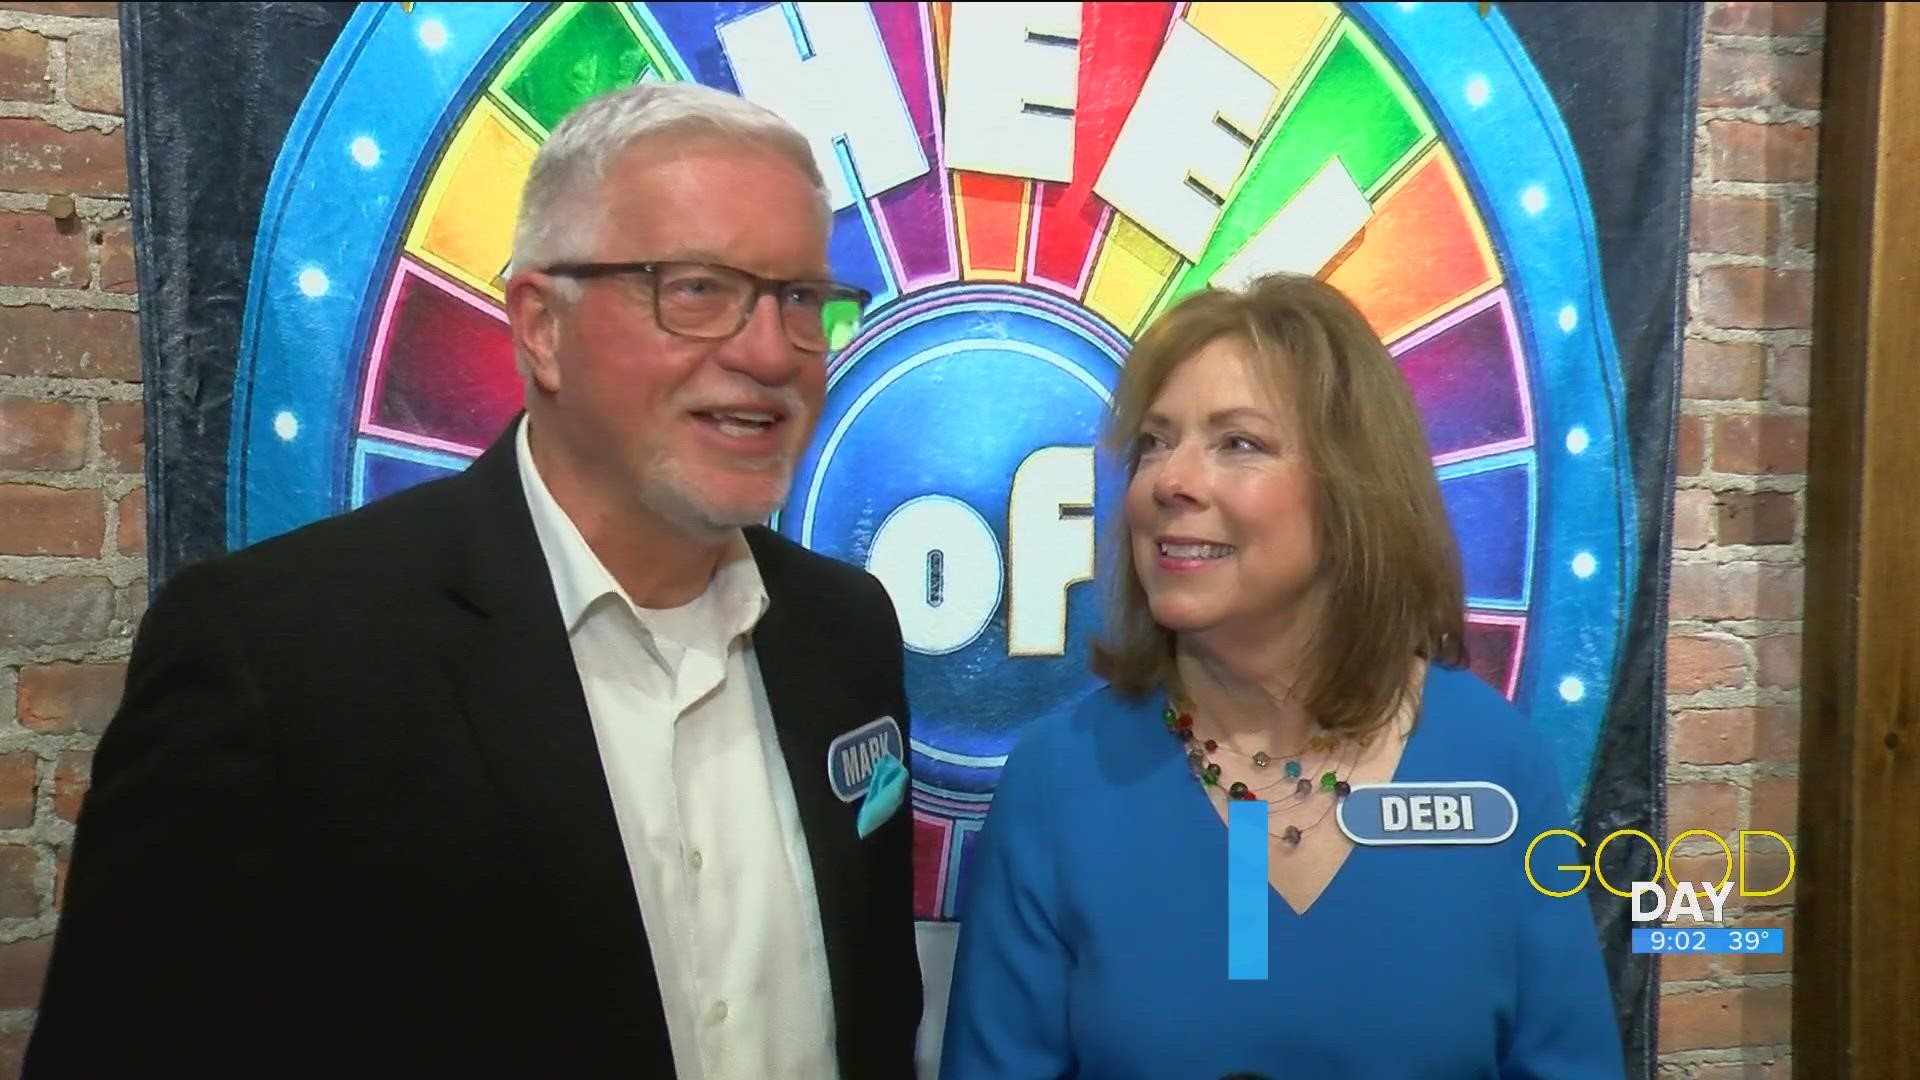 Mark and Debi Beier from Toledo won $27,000 on an episode of Wheel of Fortune that aired on Wednesday night. Mark is the former voice of the Toledo Rockets.